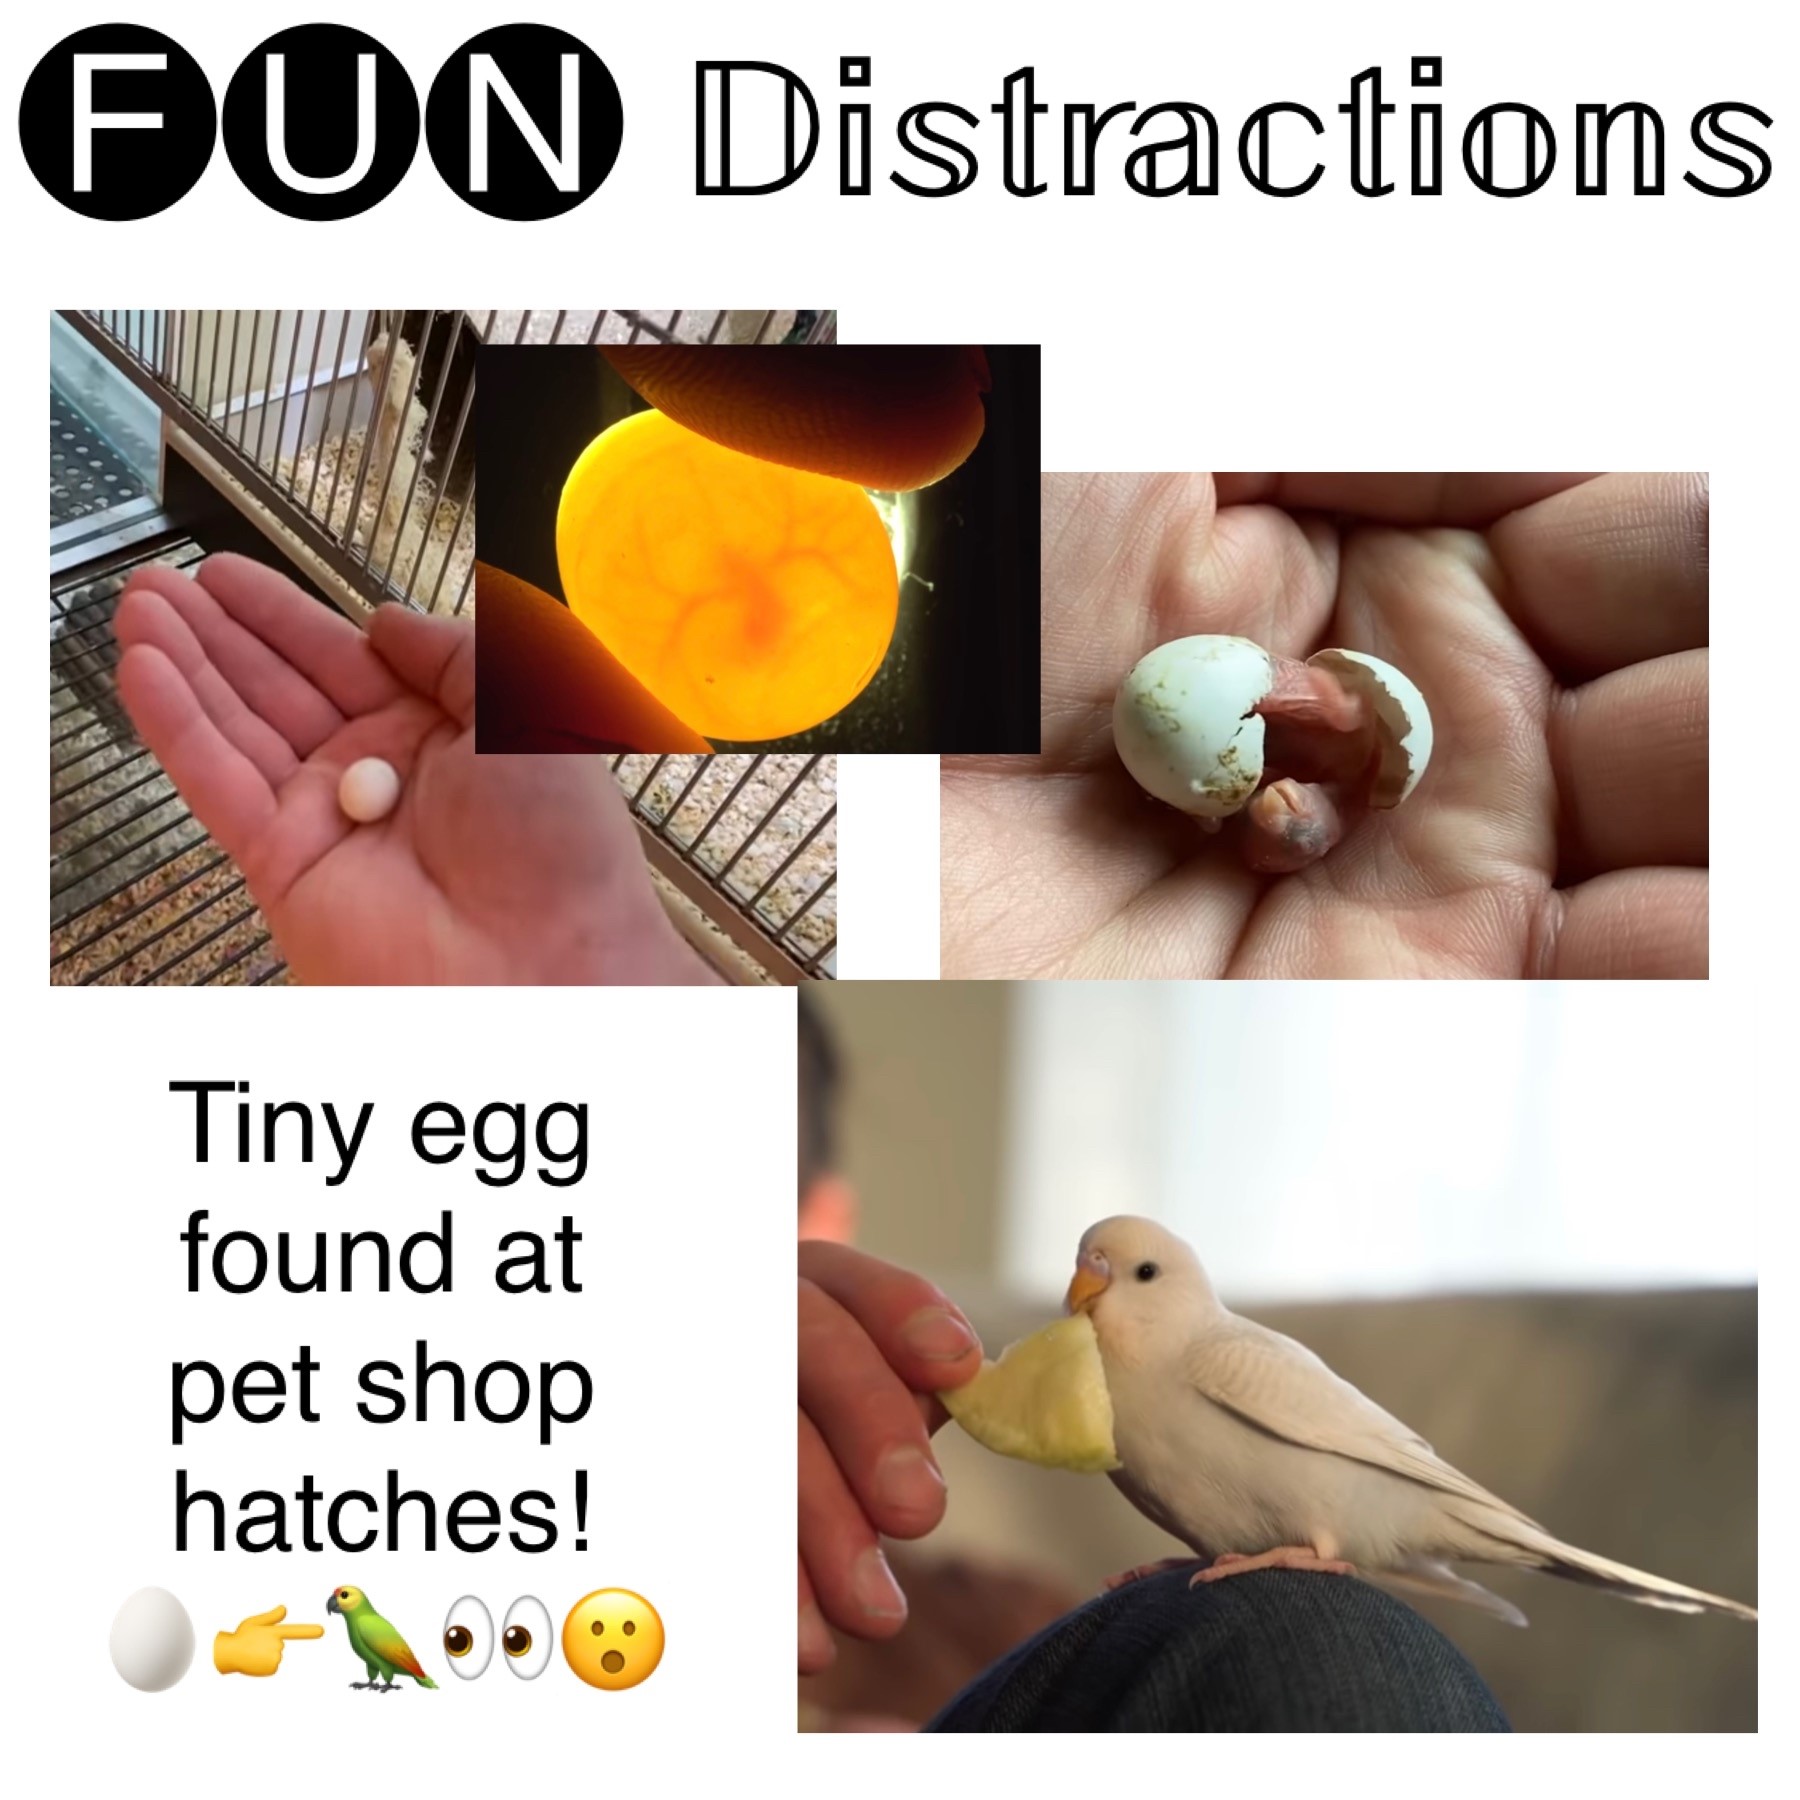 Image advertising the Library’s FUN Distractions series post about a tiny egg